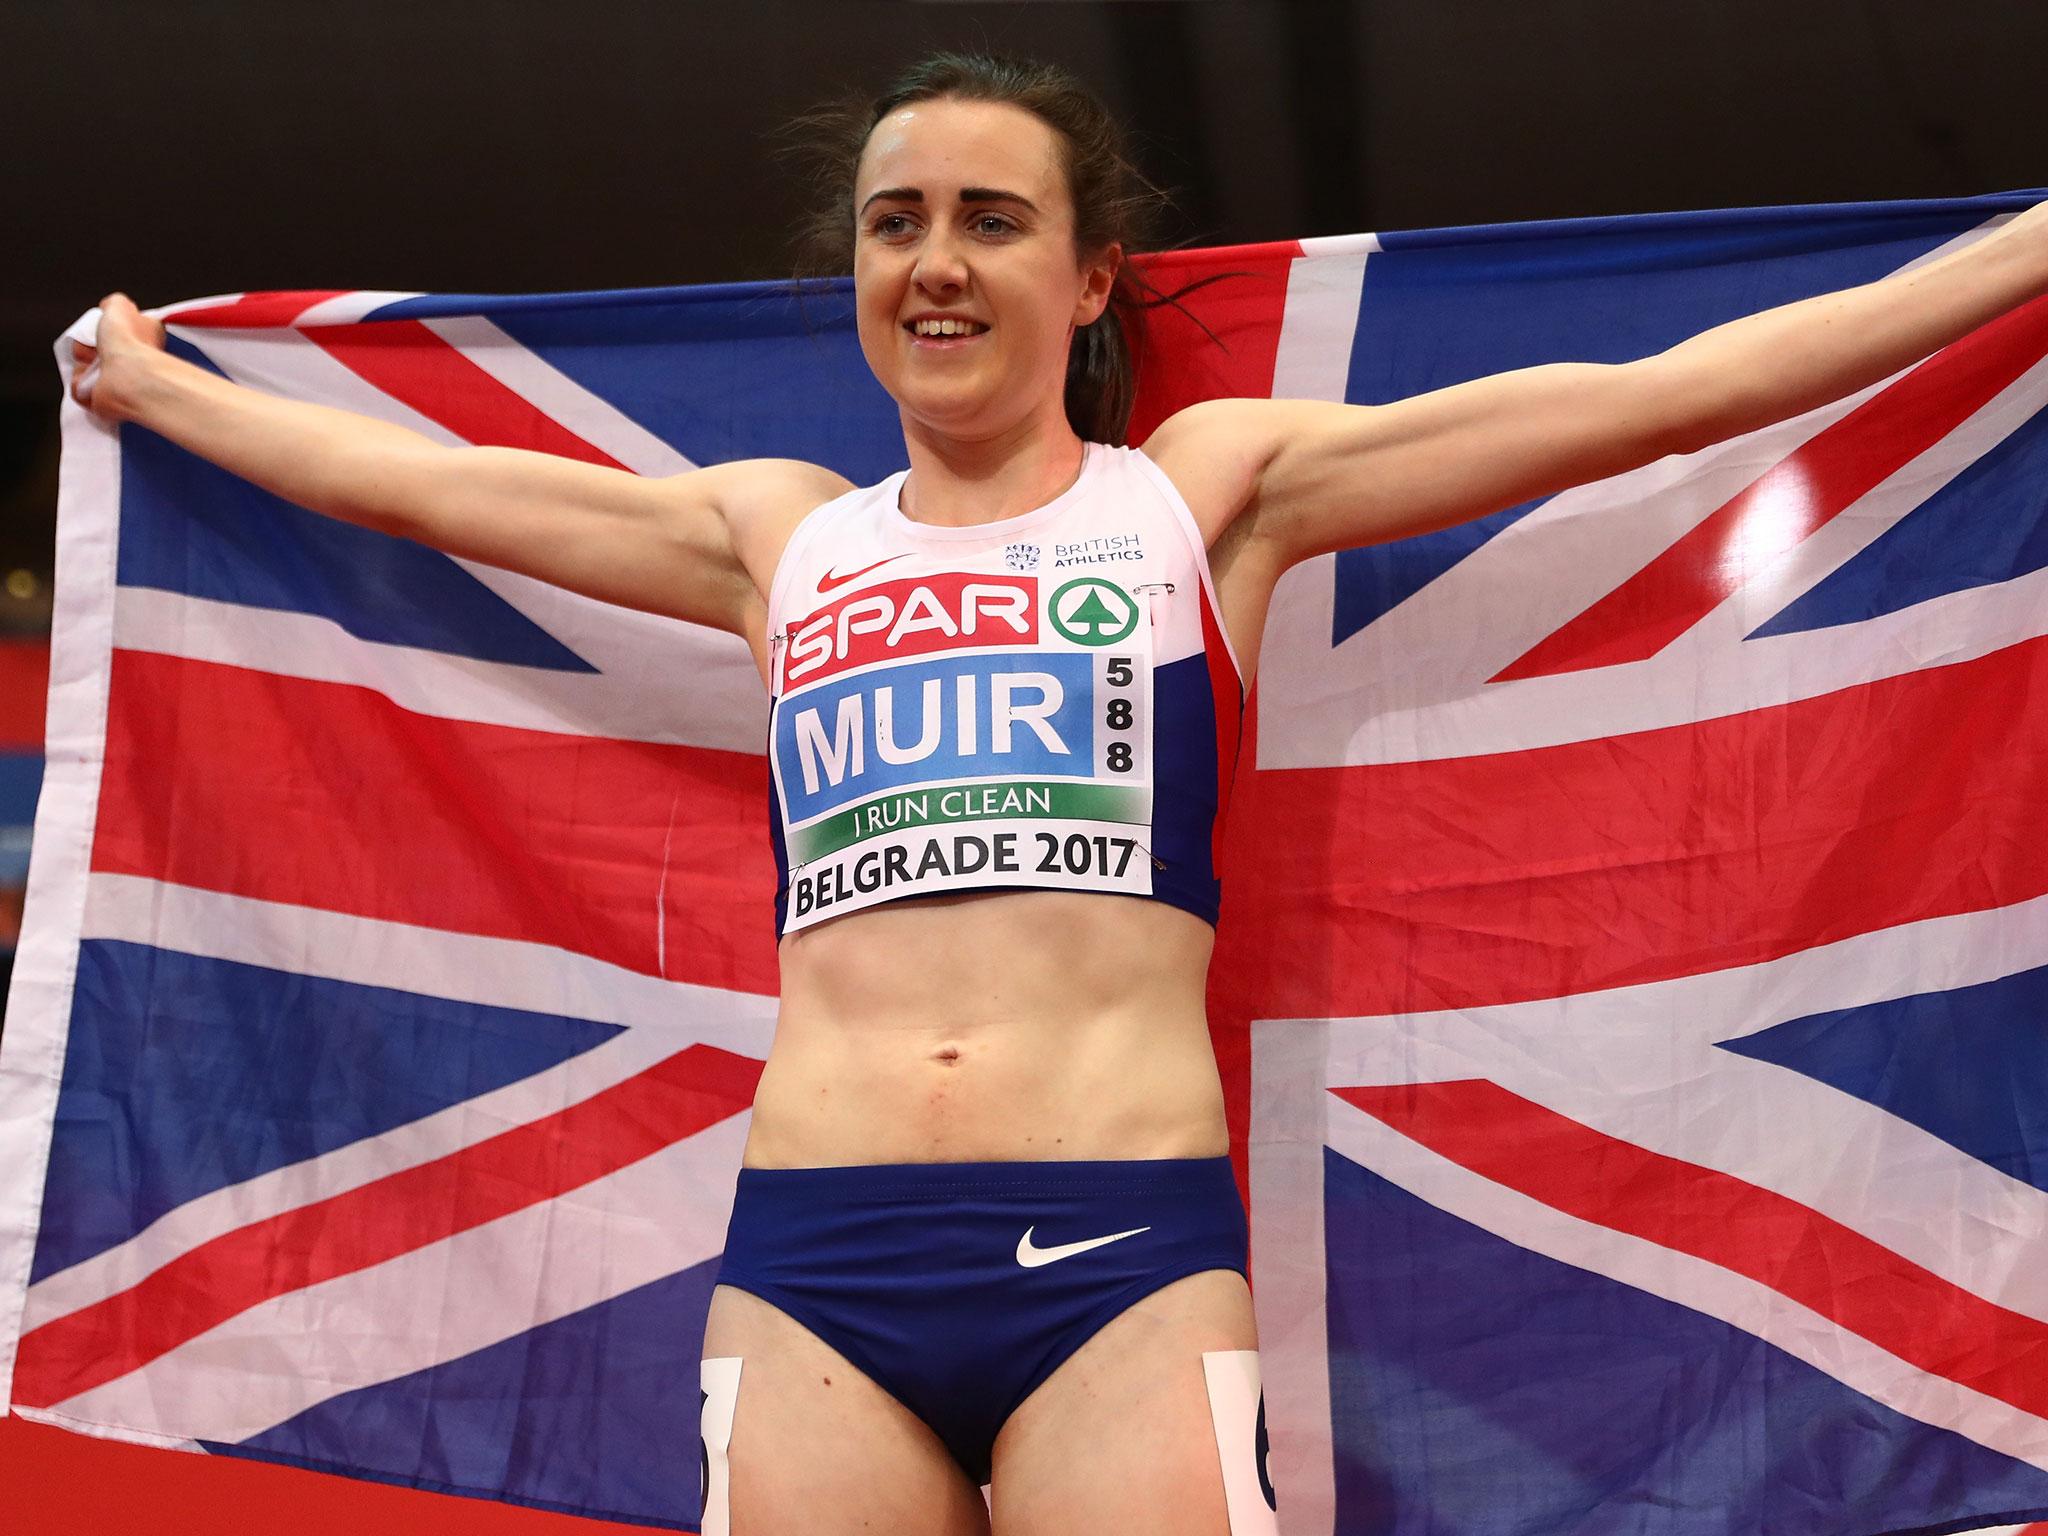 Laura Muir is the poster girl for the new generation